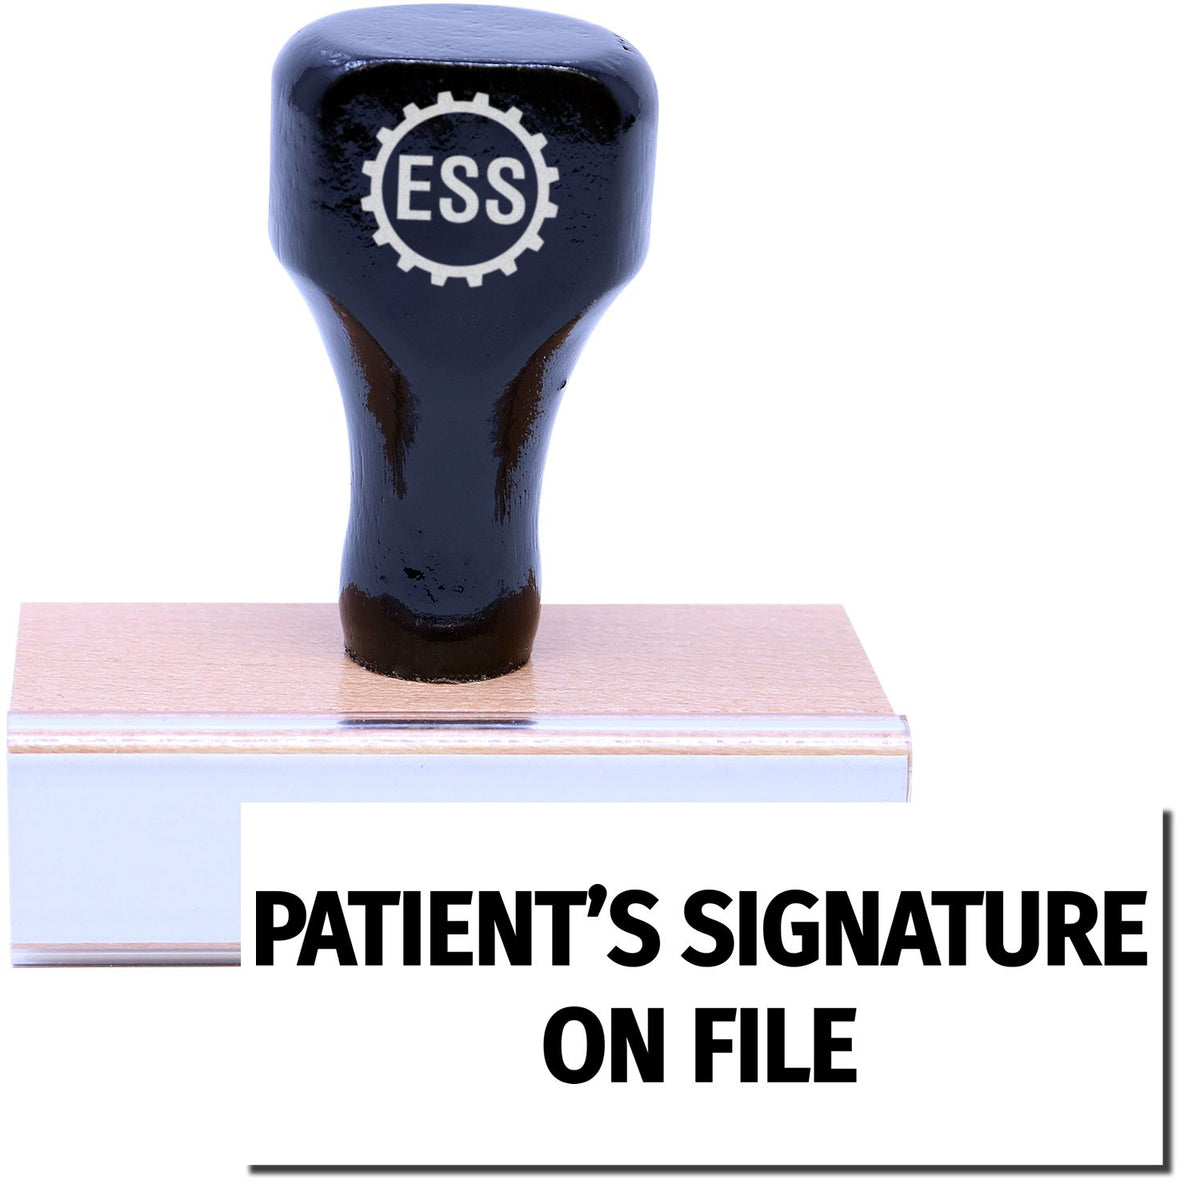 A stock office rubber stamp with a stamped image showing how the text &quot;PATIENT&#39;S SIGNATURE ON FILE&quot; in a large font is displayed after stamping.